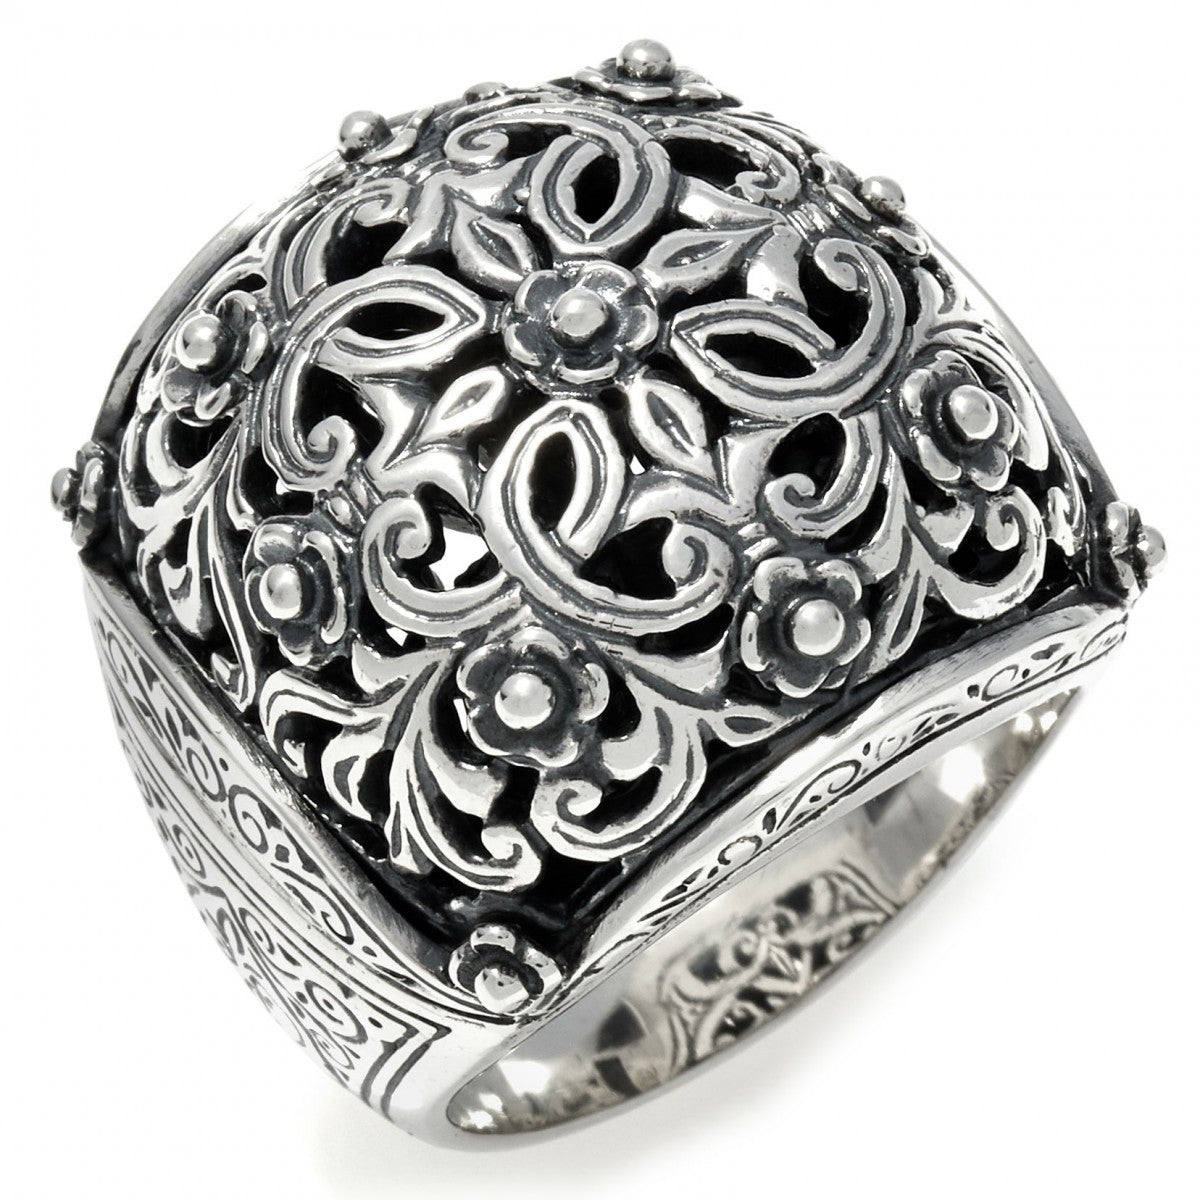 Konstantino Women’s Classic Ornate Sterling Silver Square Cushion Ring